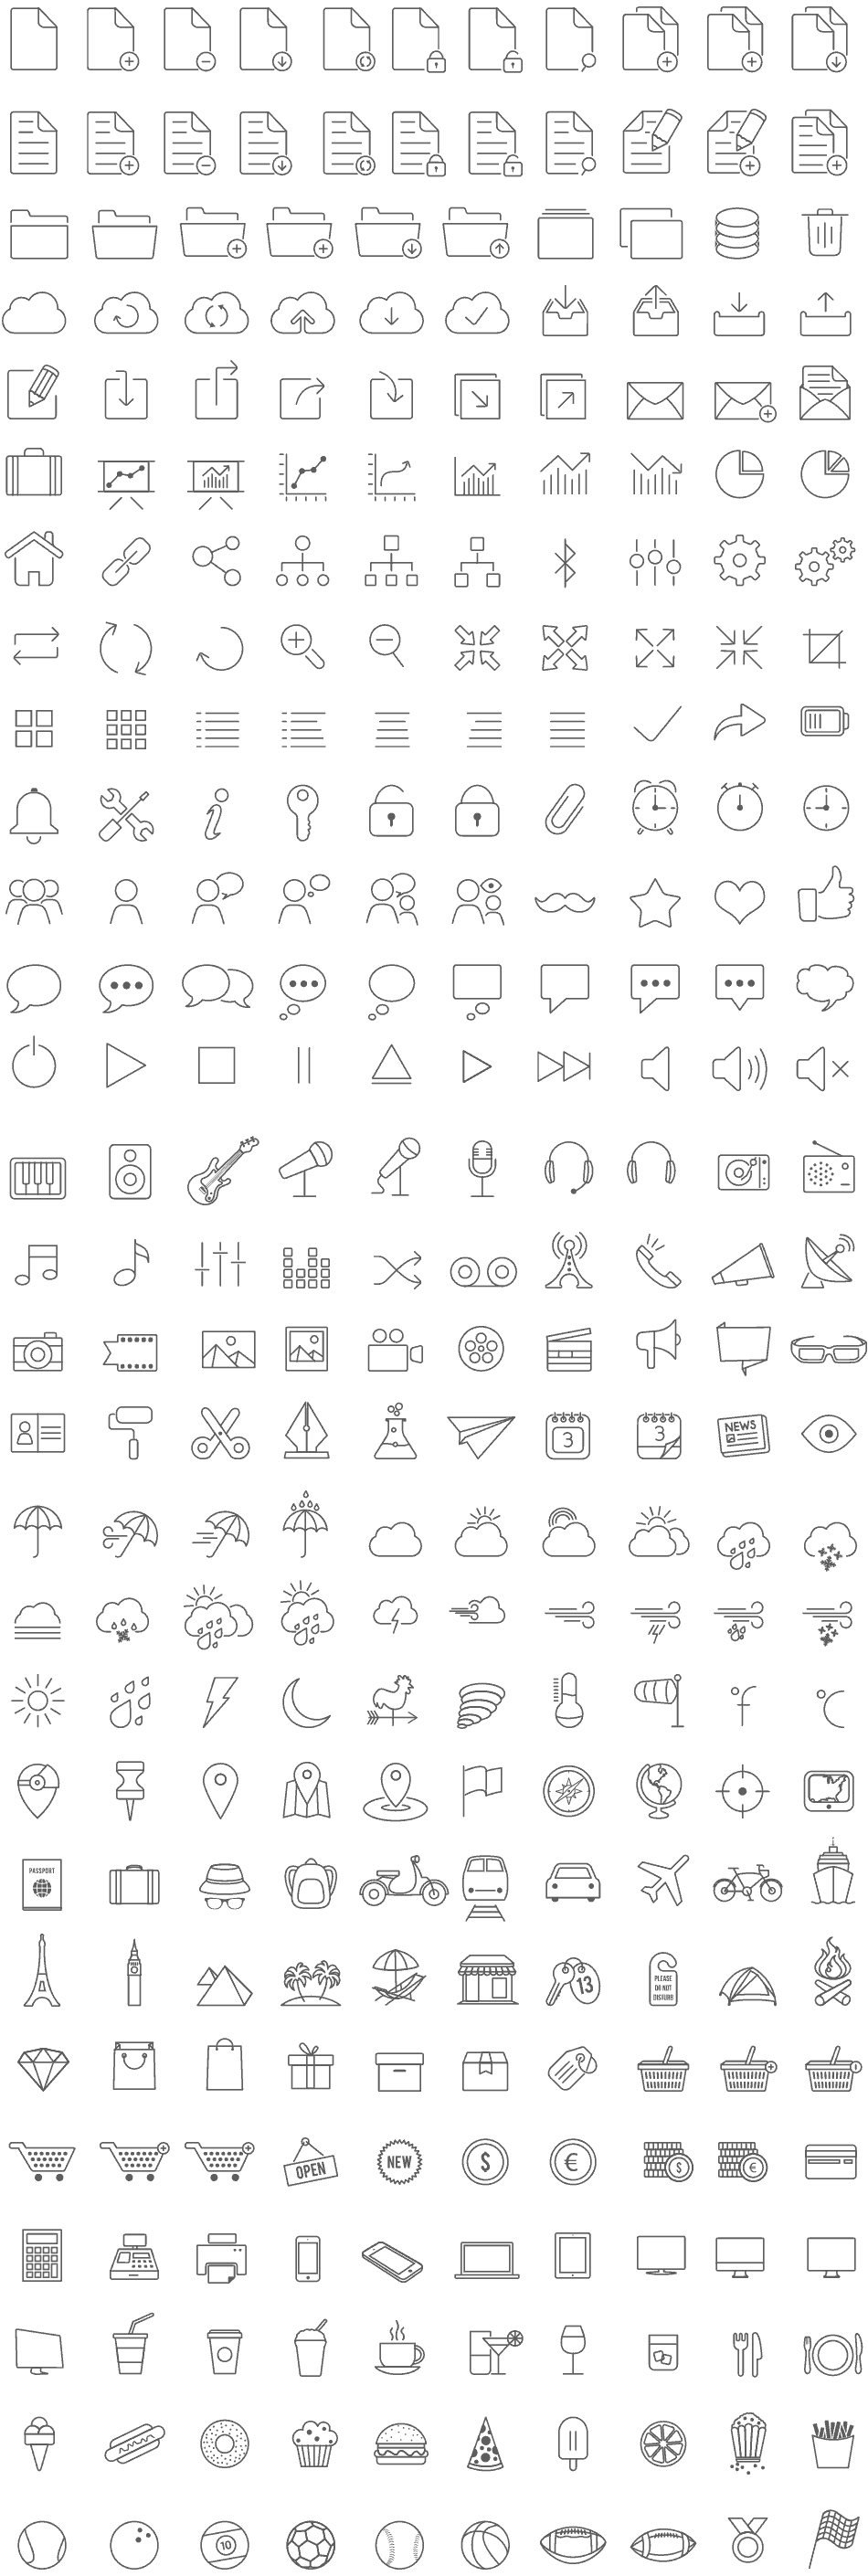 Tonicons-Outline